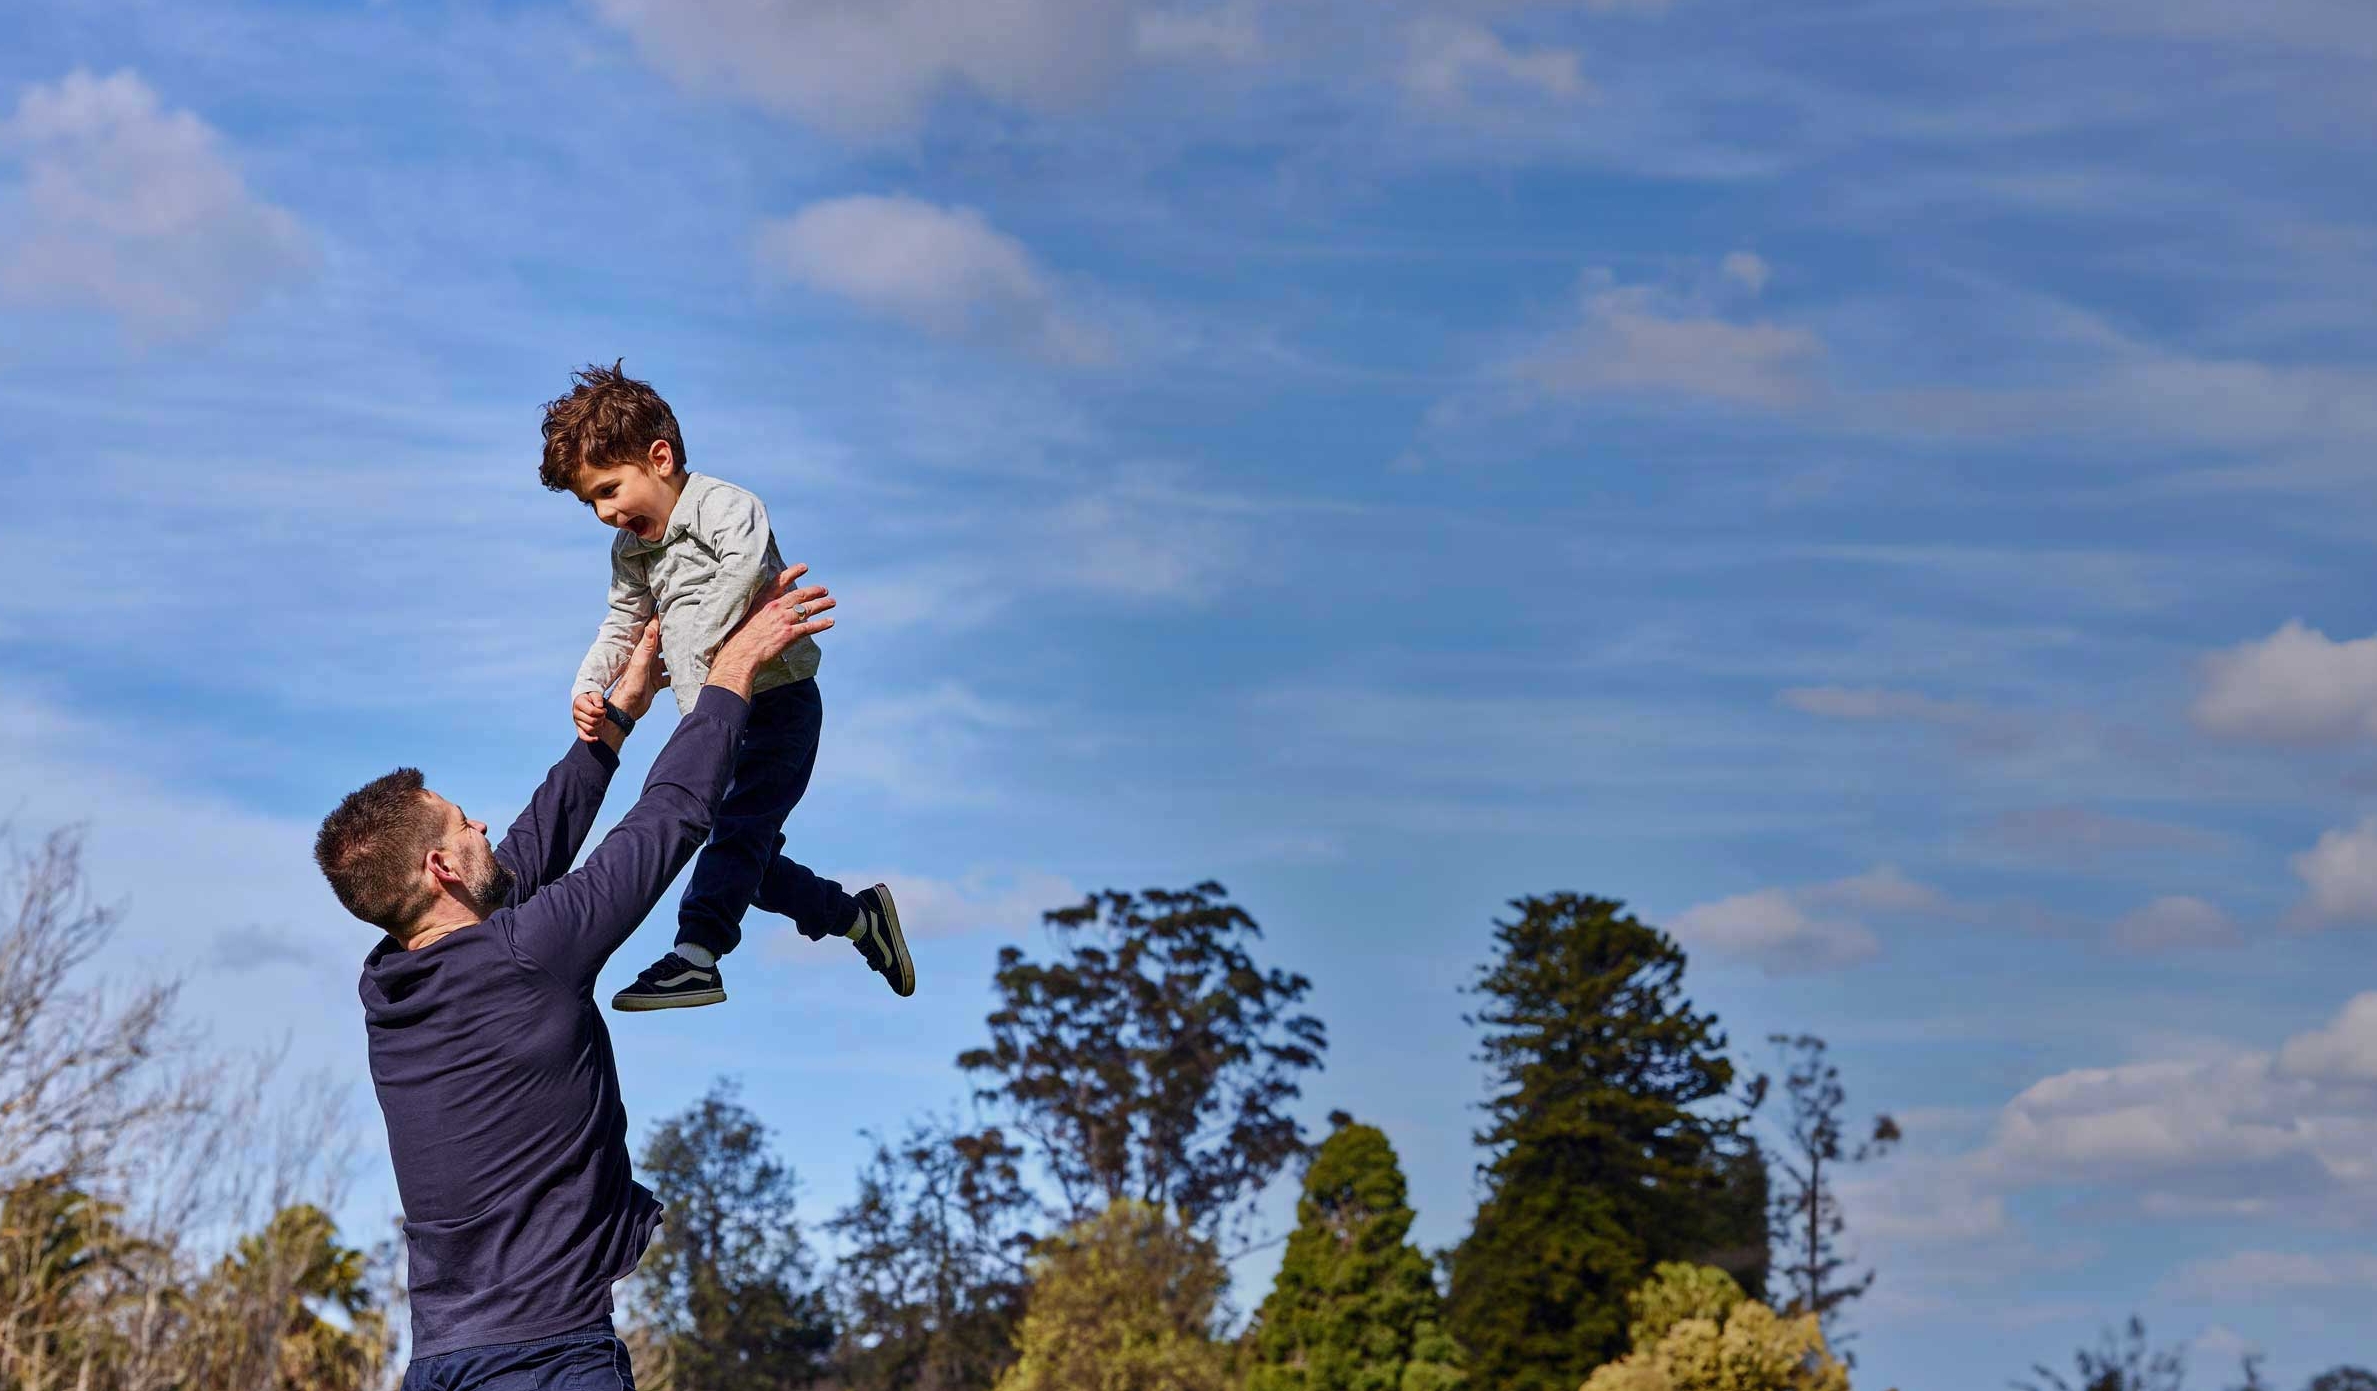 A man is throwing his young son up in the air in a park